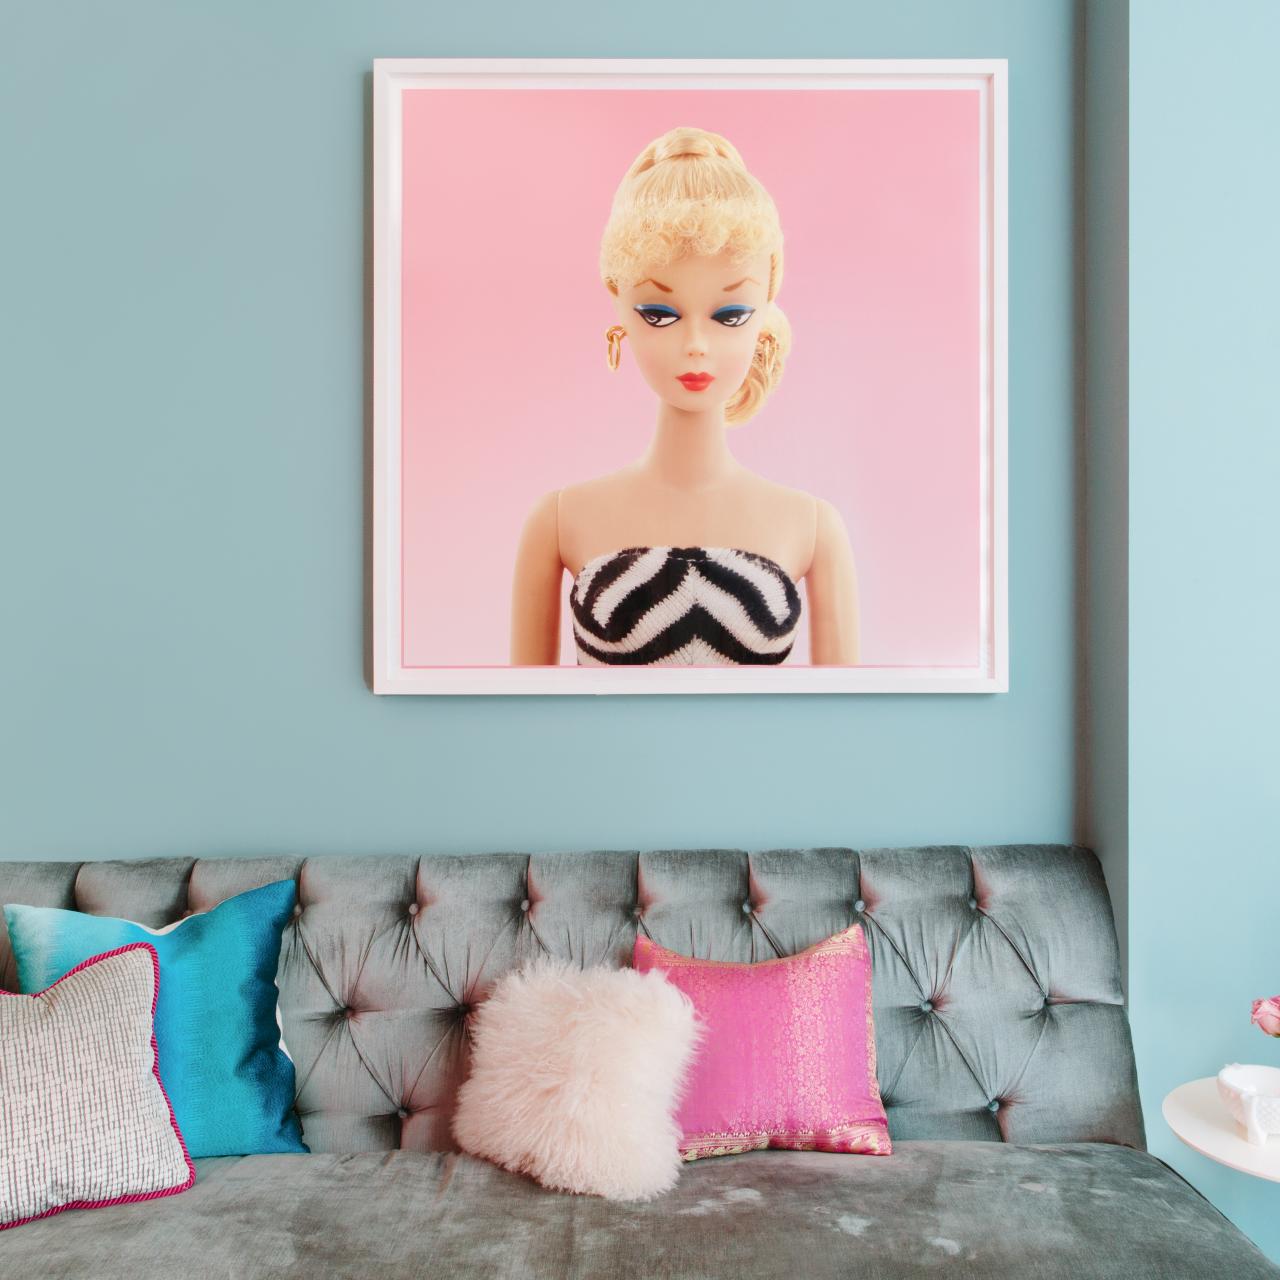 100 Barbie pink Ideas - Top Creative Designs from Artists